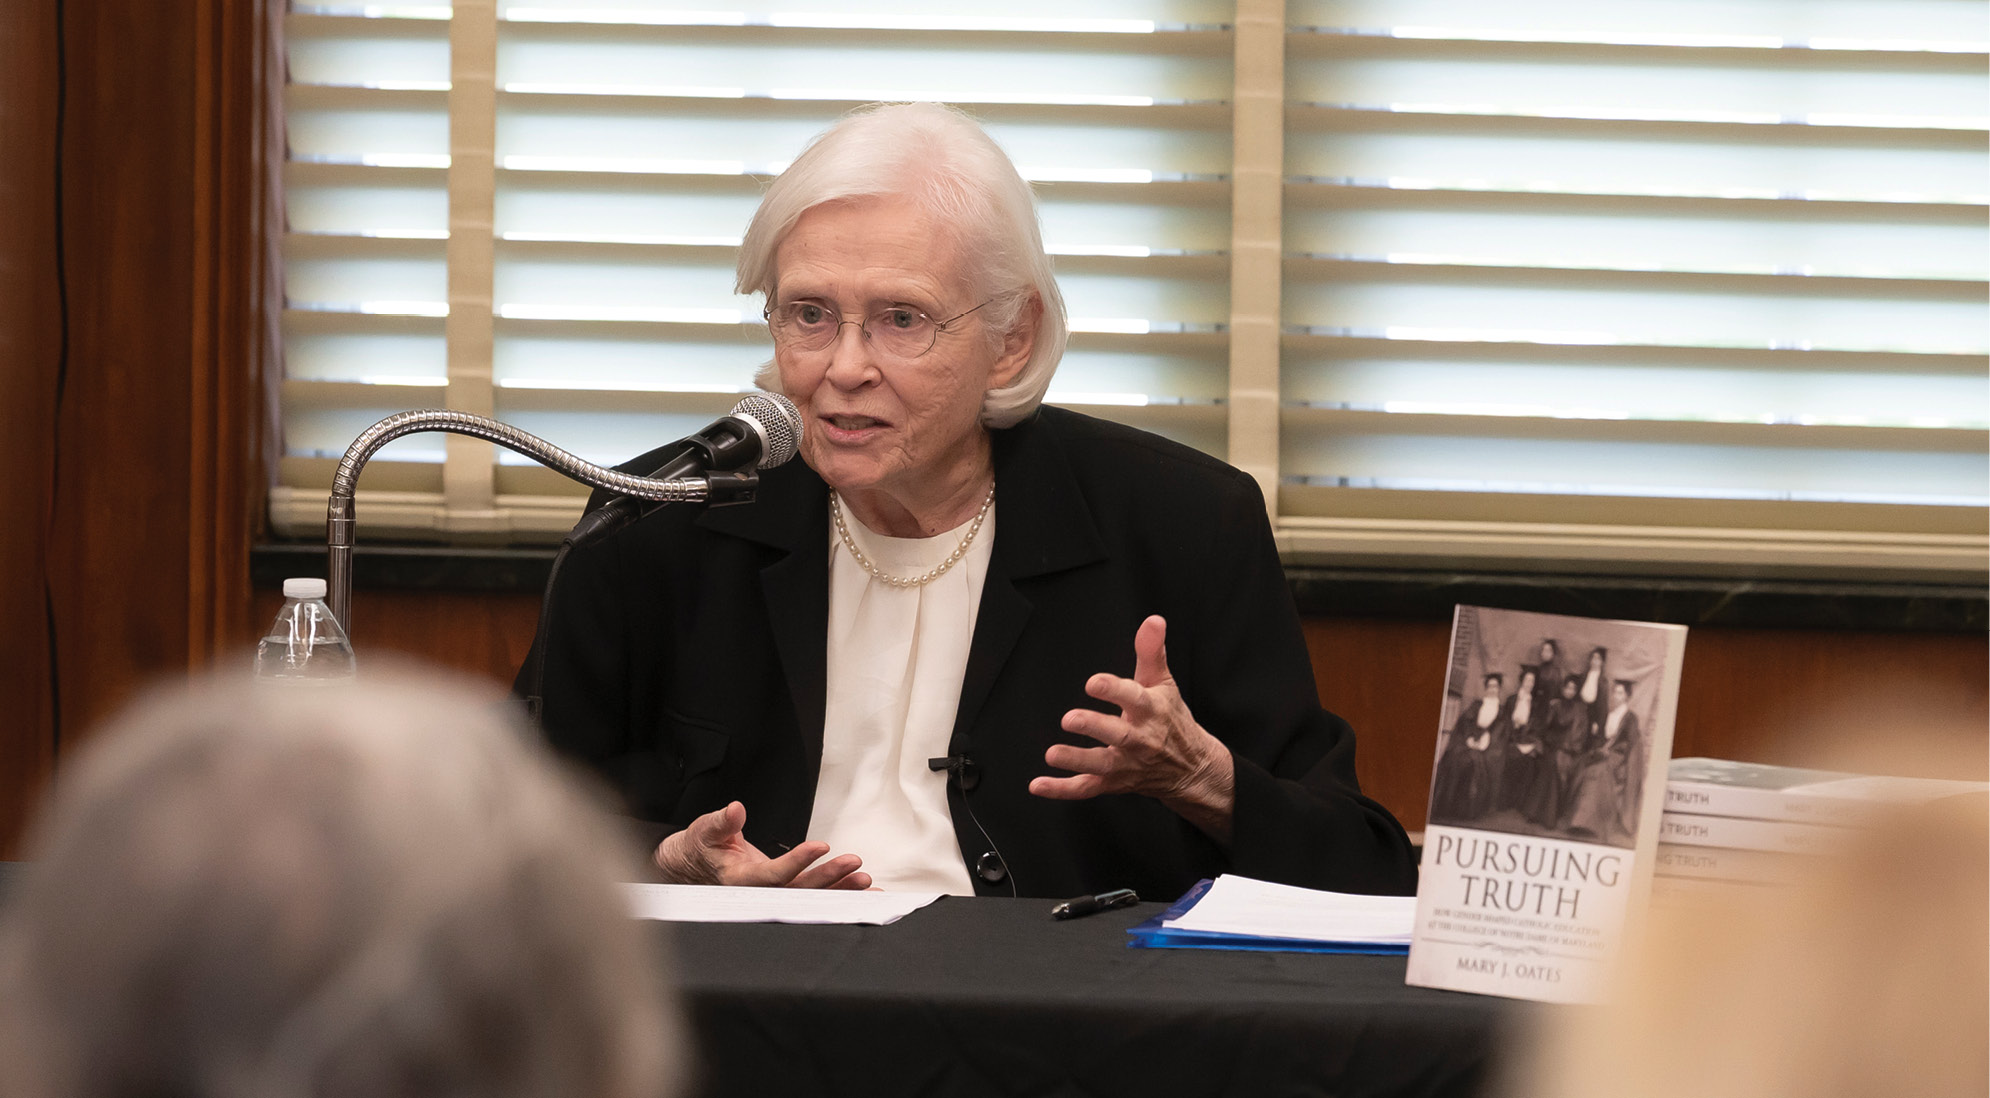 Sr. Mary Oates at her book signing